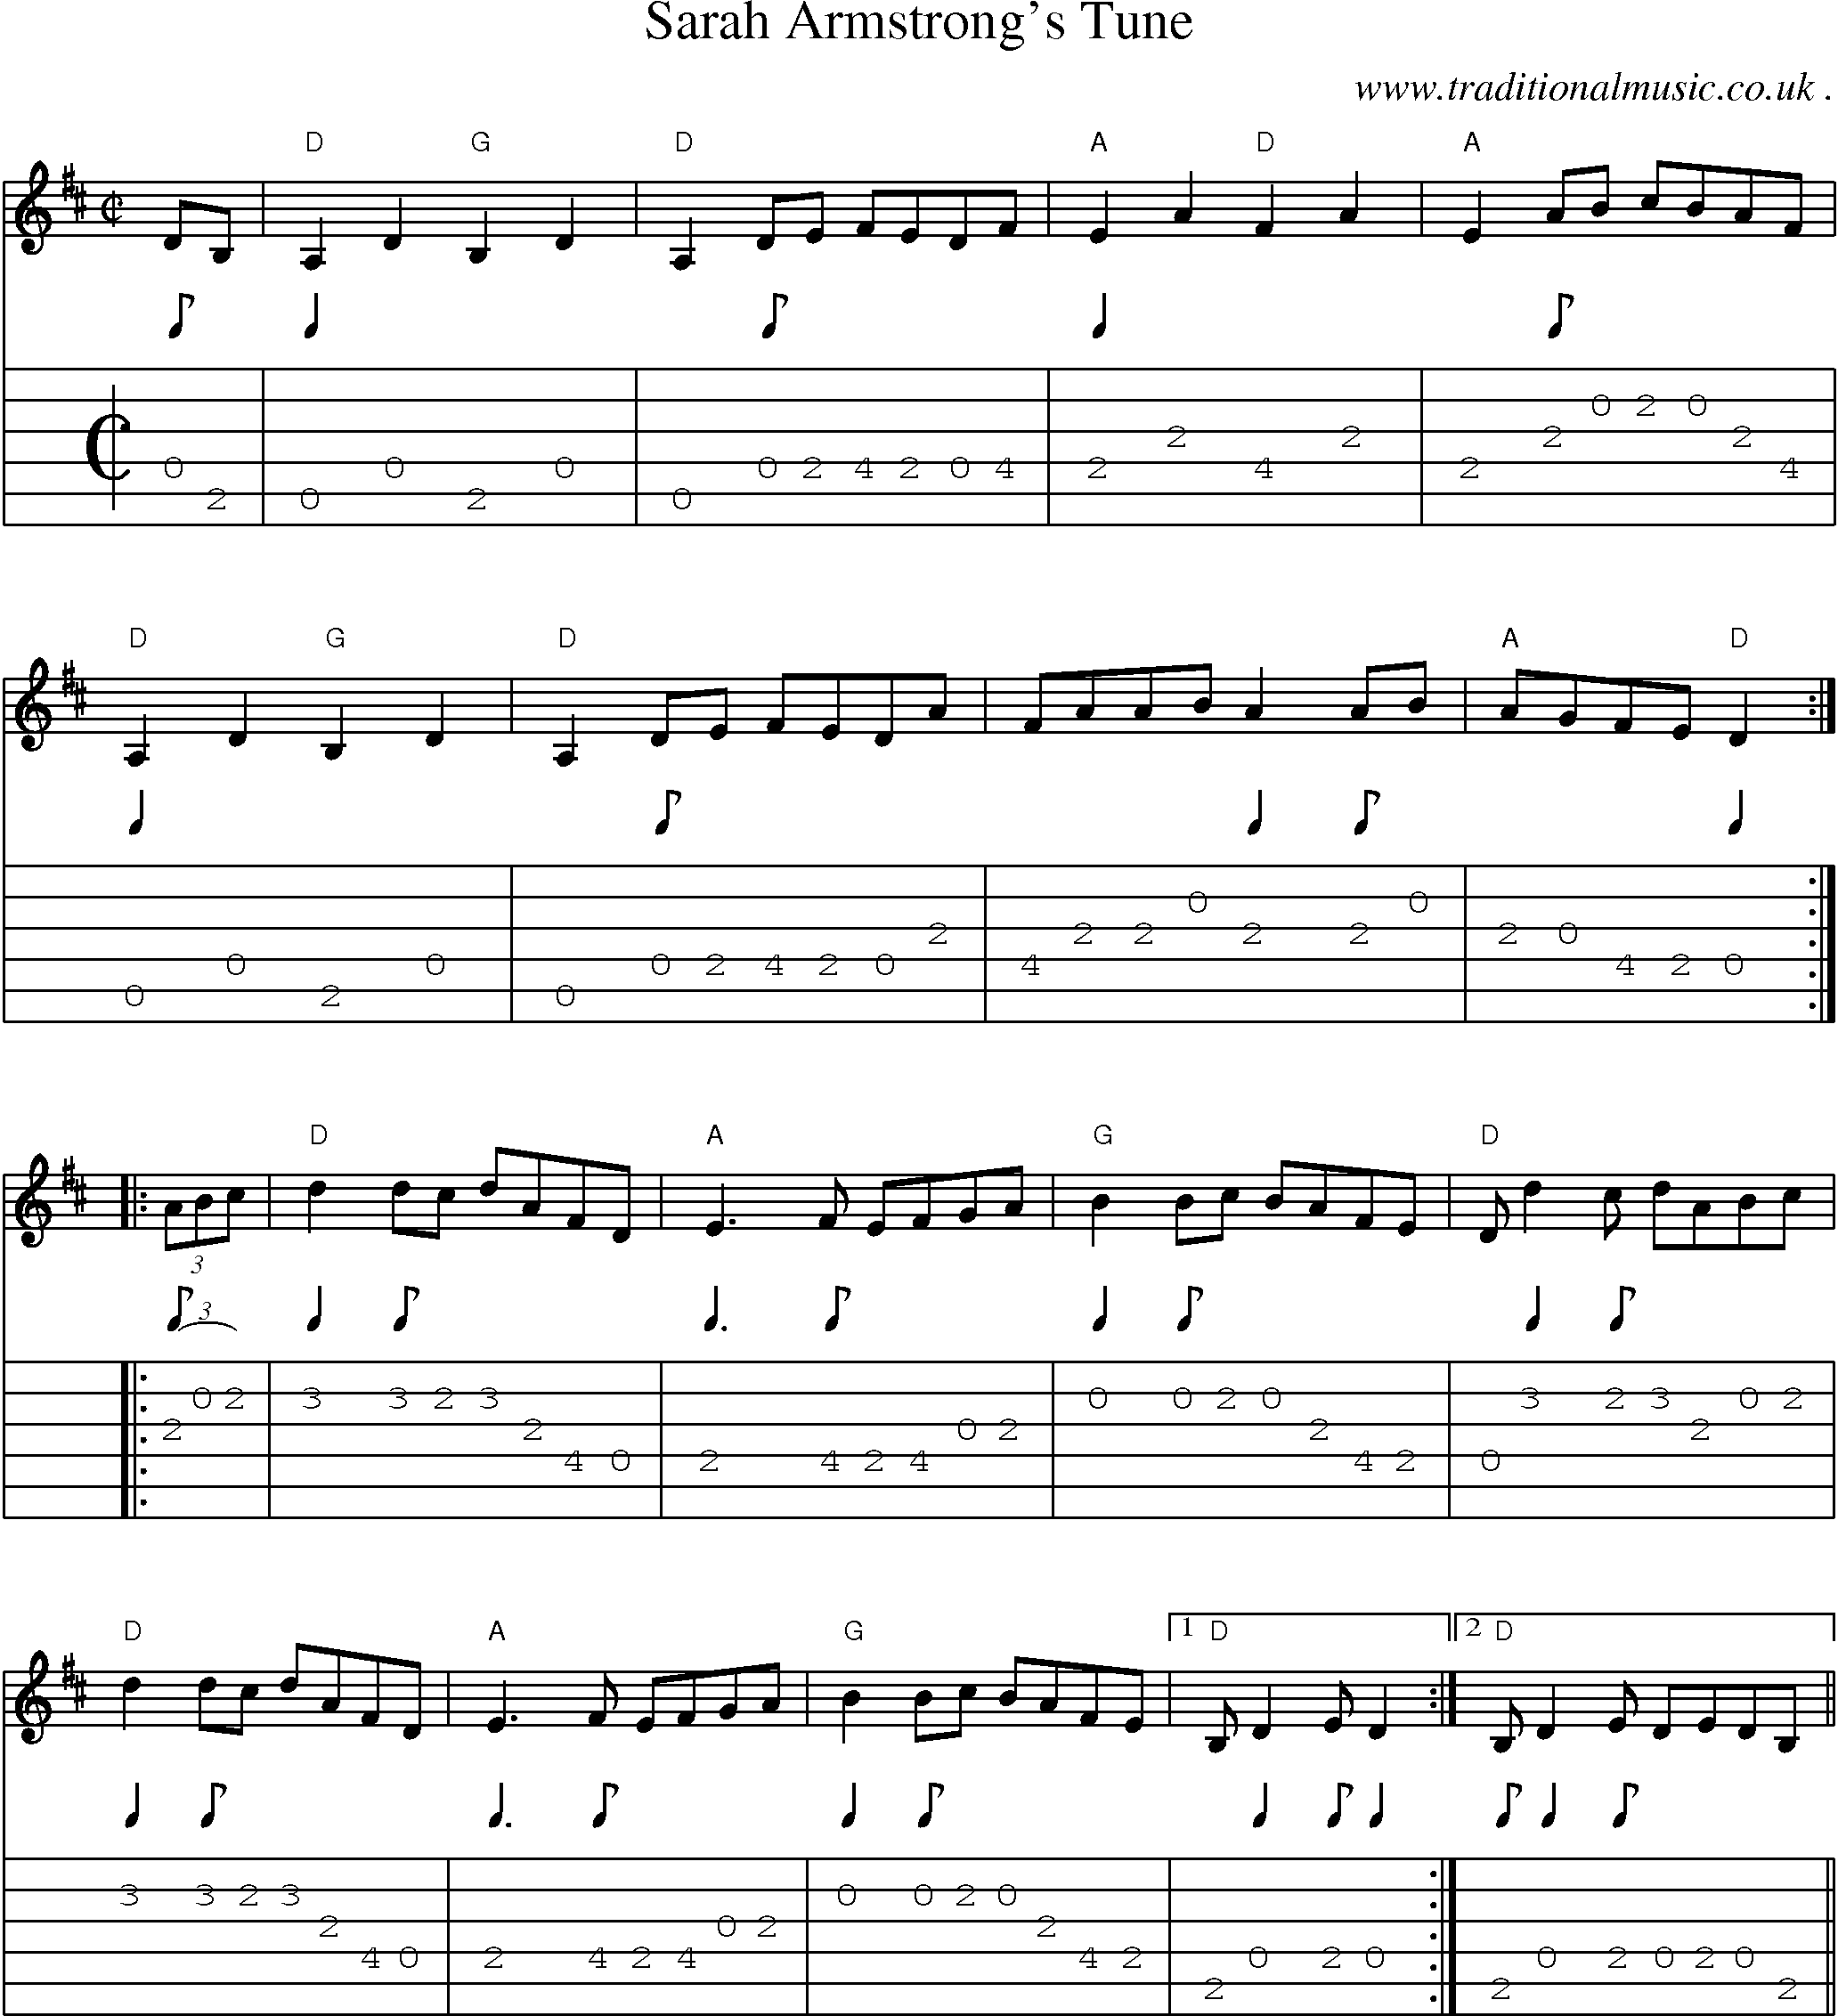 Music Score and Guitar Tabs for Sarah Armstrongs Tune